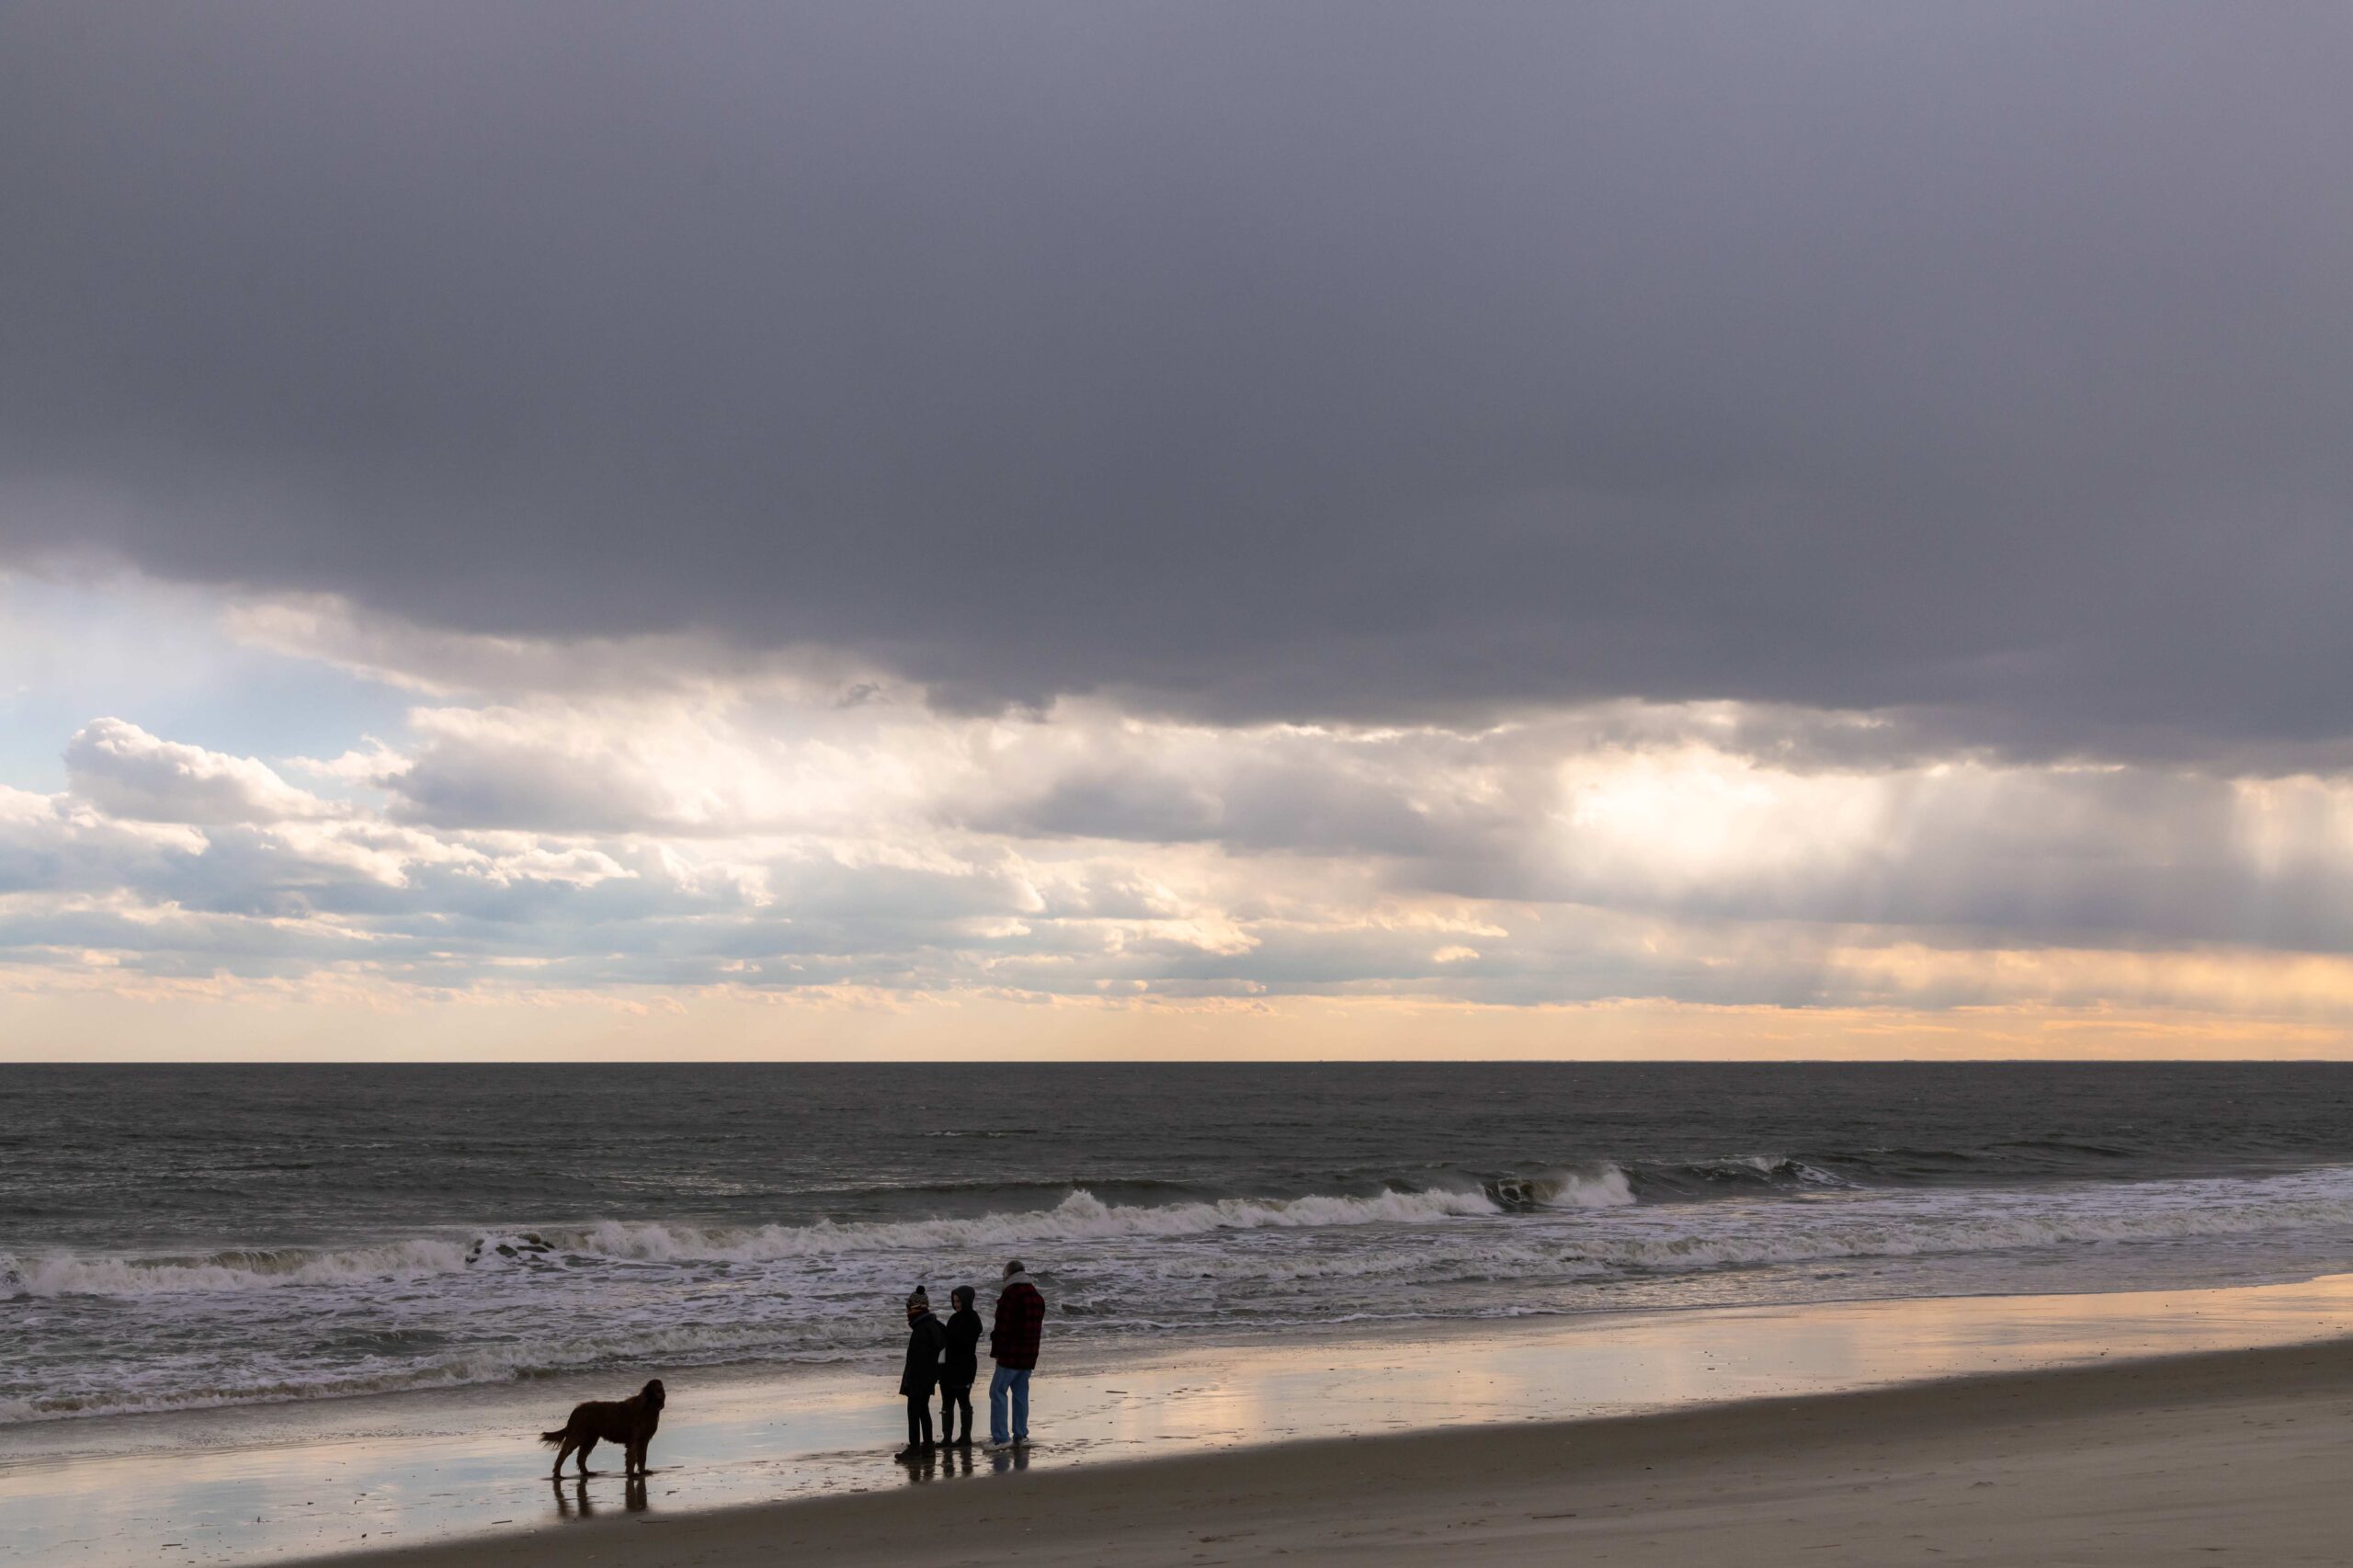 Sunlight streaming through layers of dark clouds in the sky with a family of three and their dog standing at the shoreline looking out at the ocean and sky